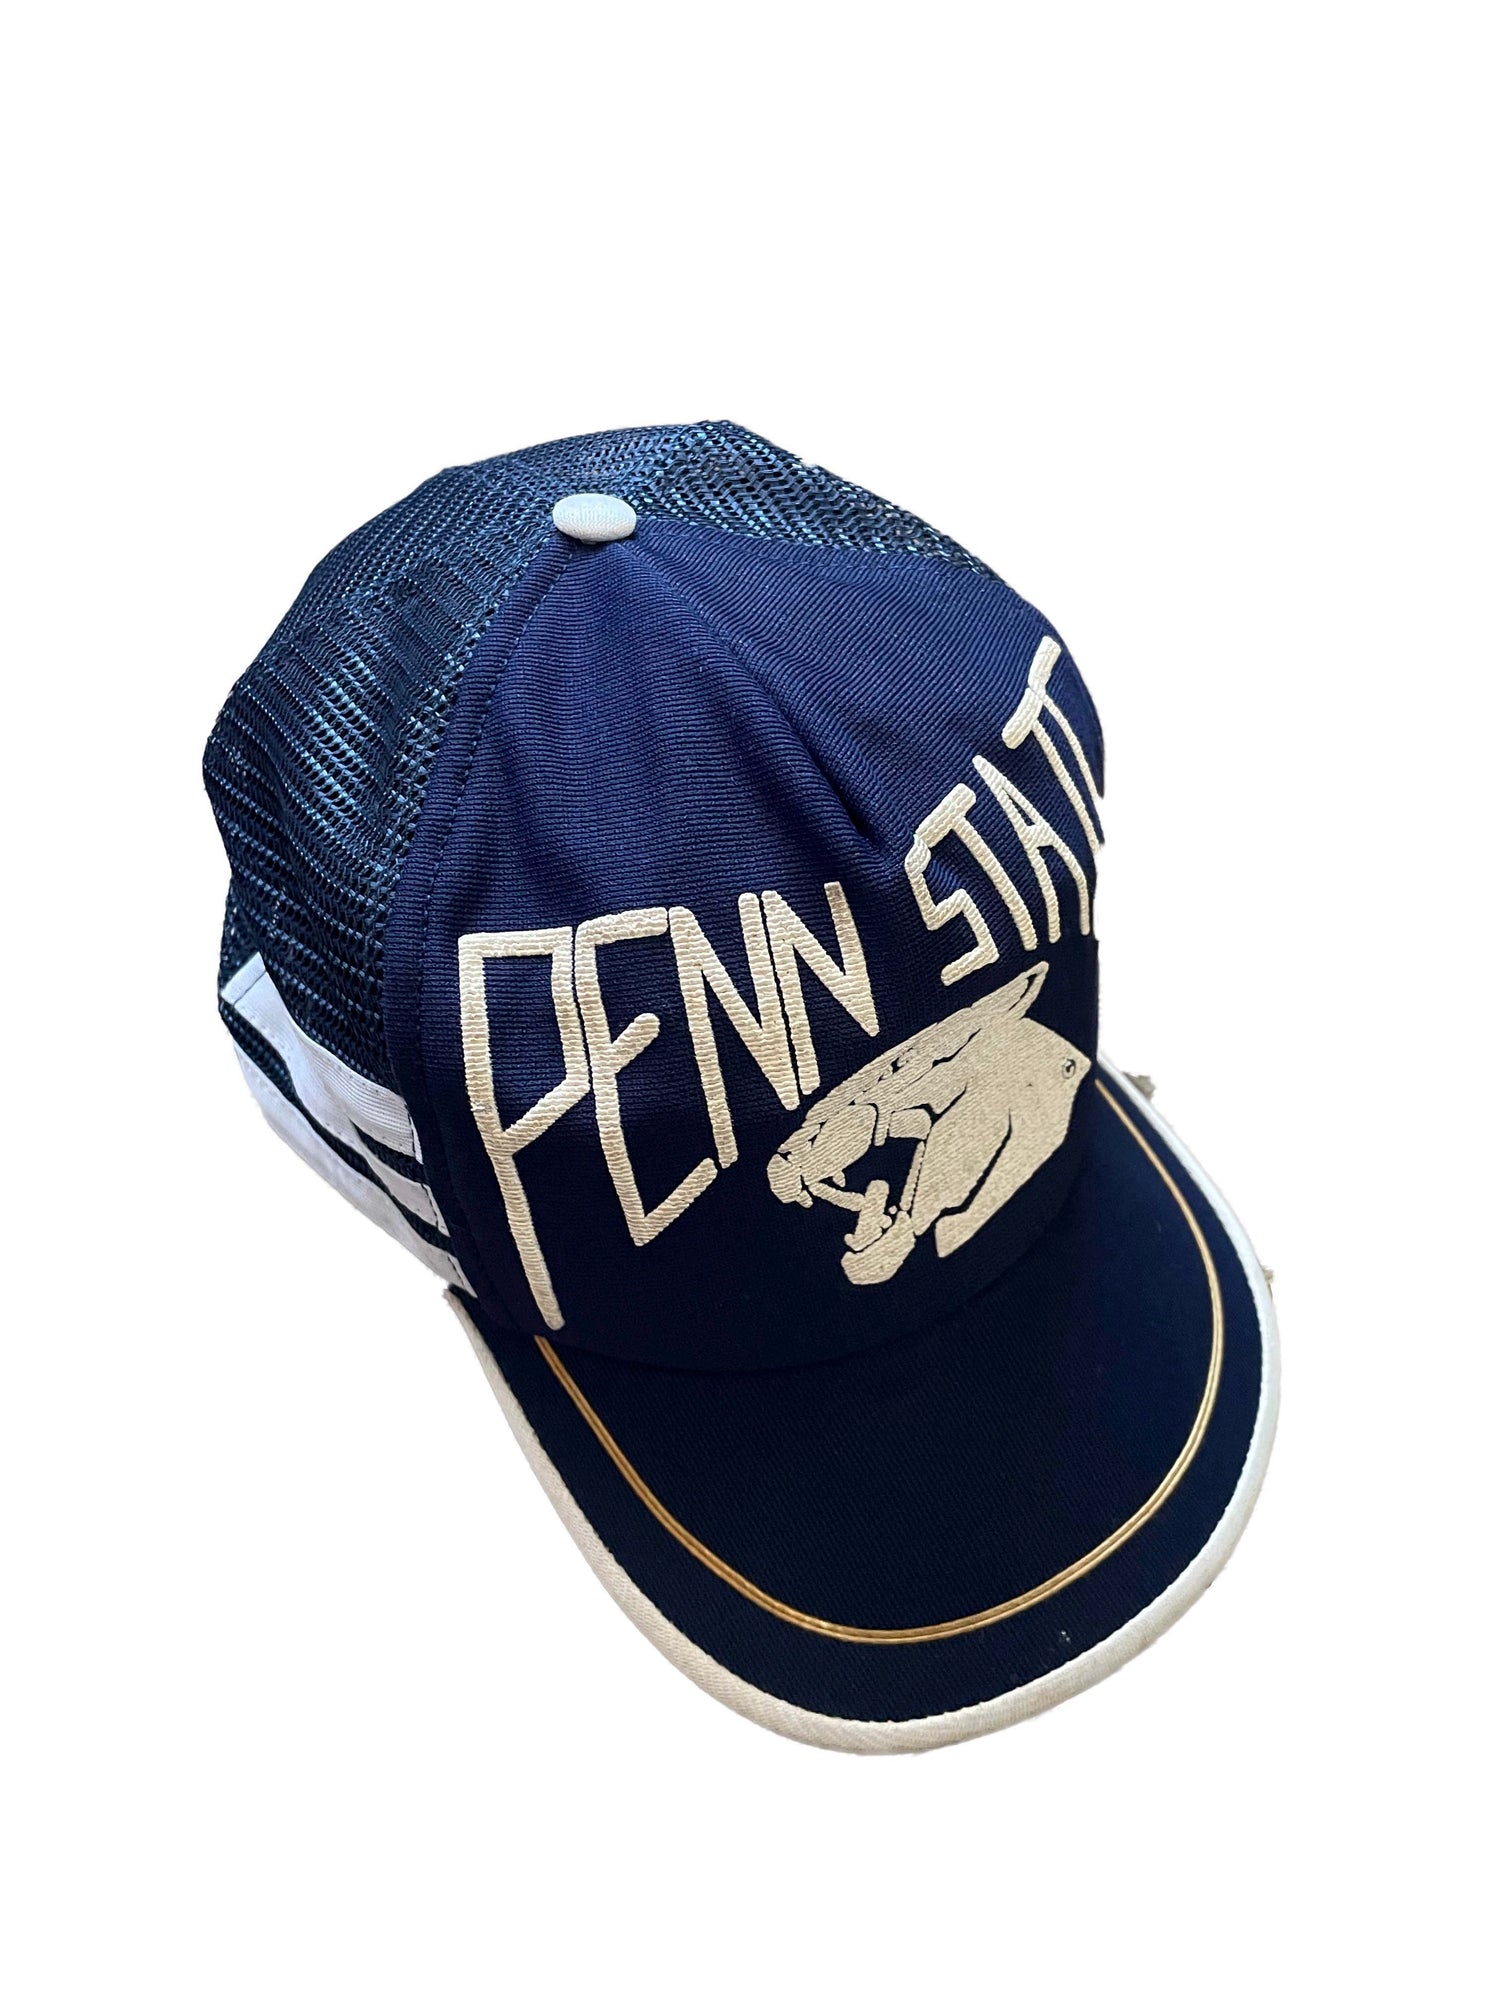 Vintage Style Penn State Lion - Penn State Nittany Lions - Trucker Hats  sold by Reciprocity Royal, SKU 42840797